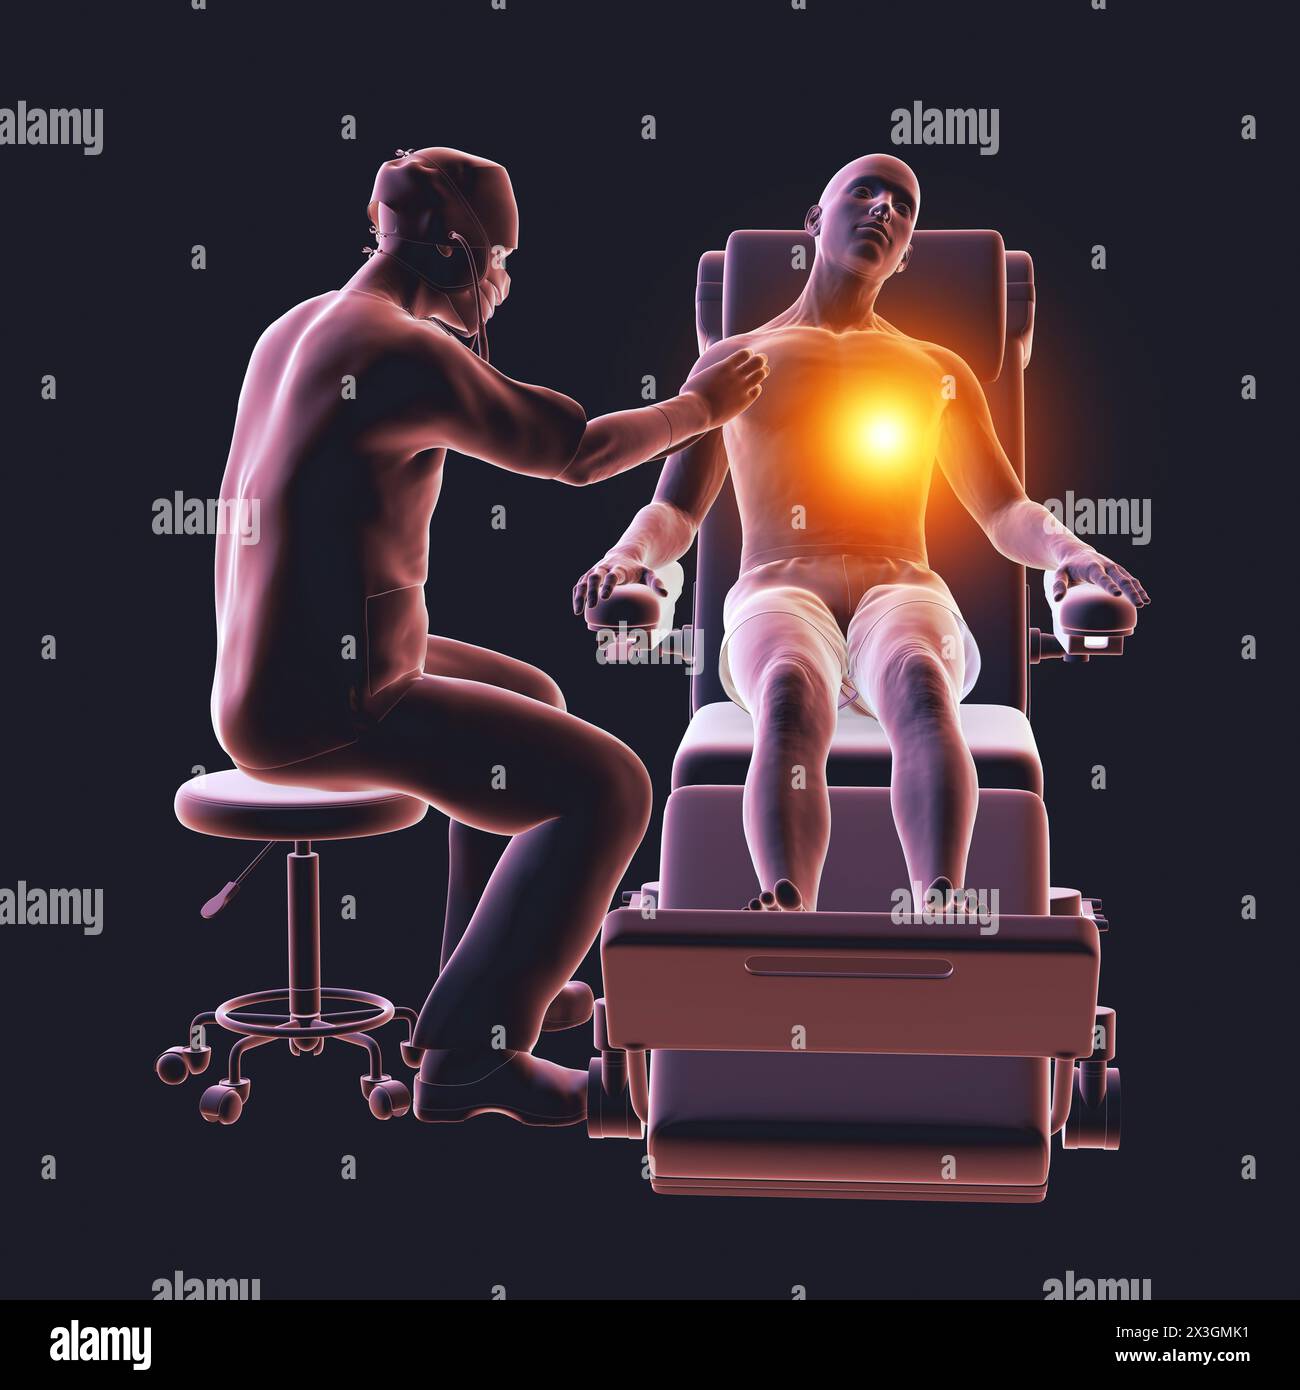 Illustration depicting a male patient on a medical wheel experiencing heart pain, conveying the urgency of cardiovascular distress. Stock Photo